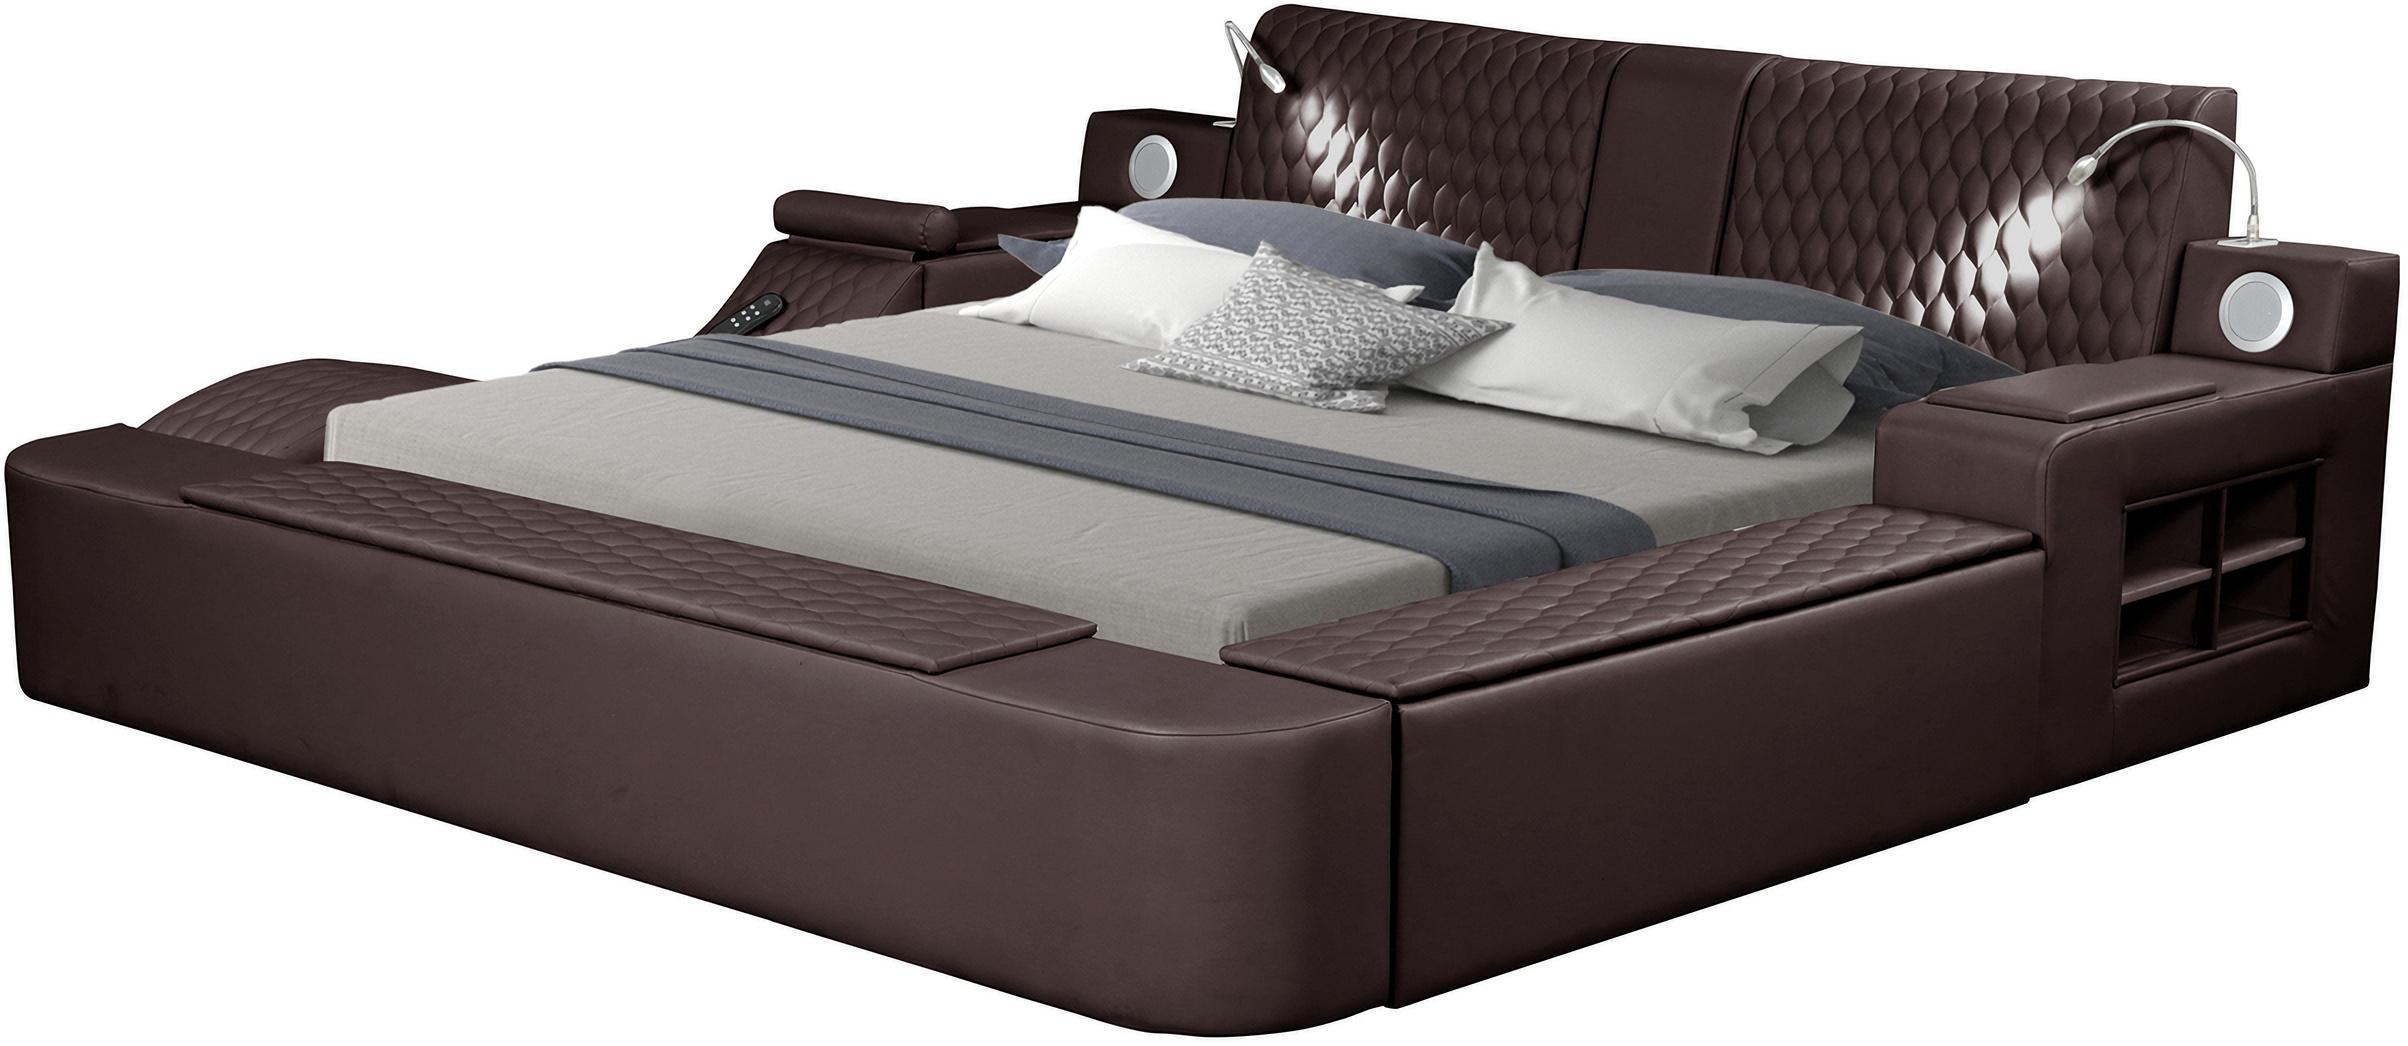 

    
Brown Eco Leather Smart Multifunctional Queen Bed ZOYA Galaxy Home Contemporary
